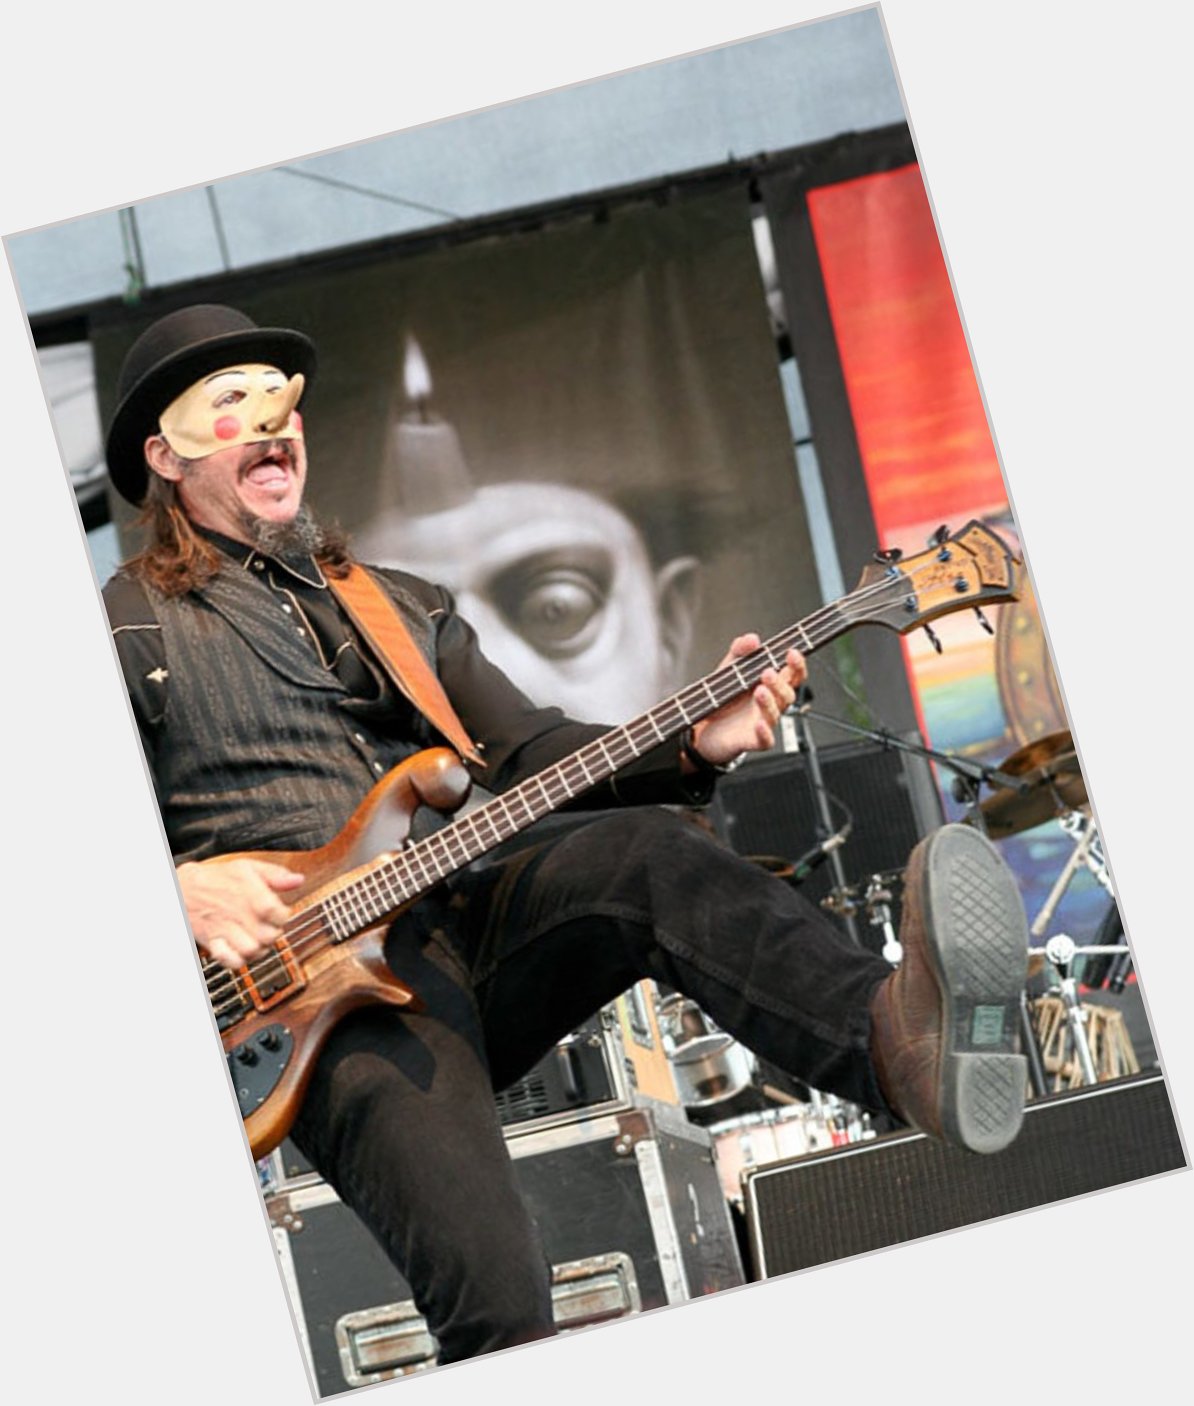 Happy 58th birthday to the best bassplayer ever. 
Les Claypool  